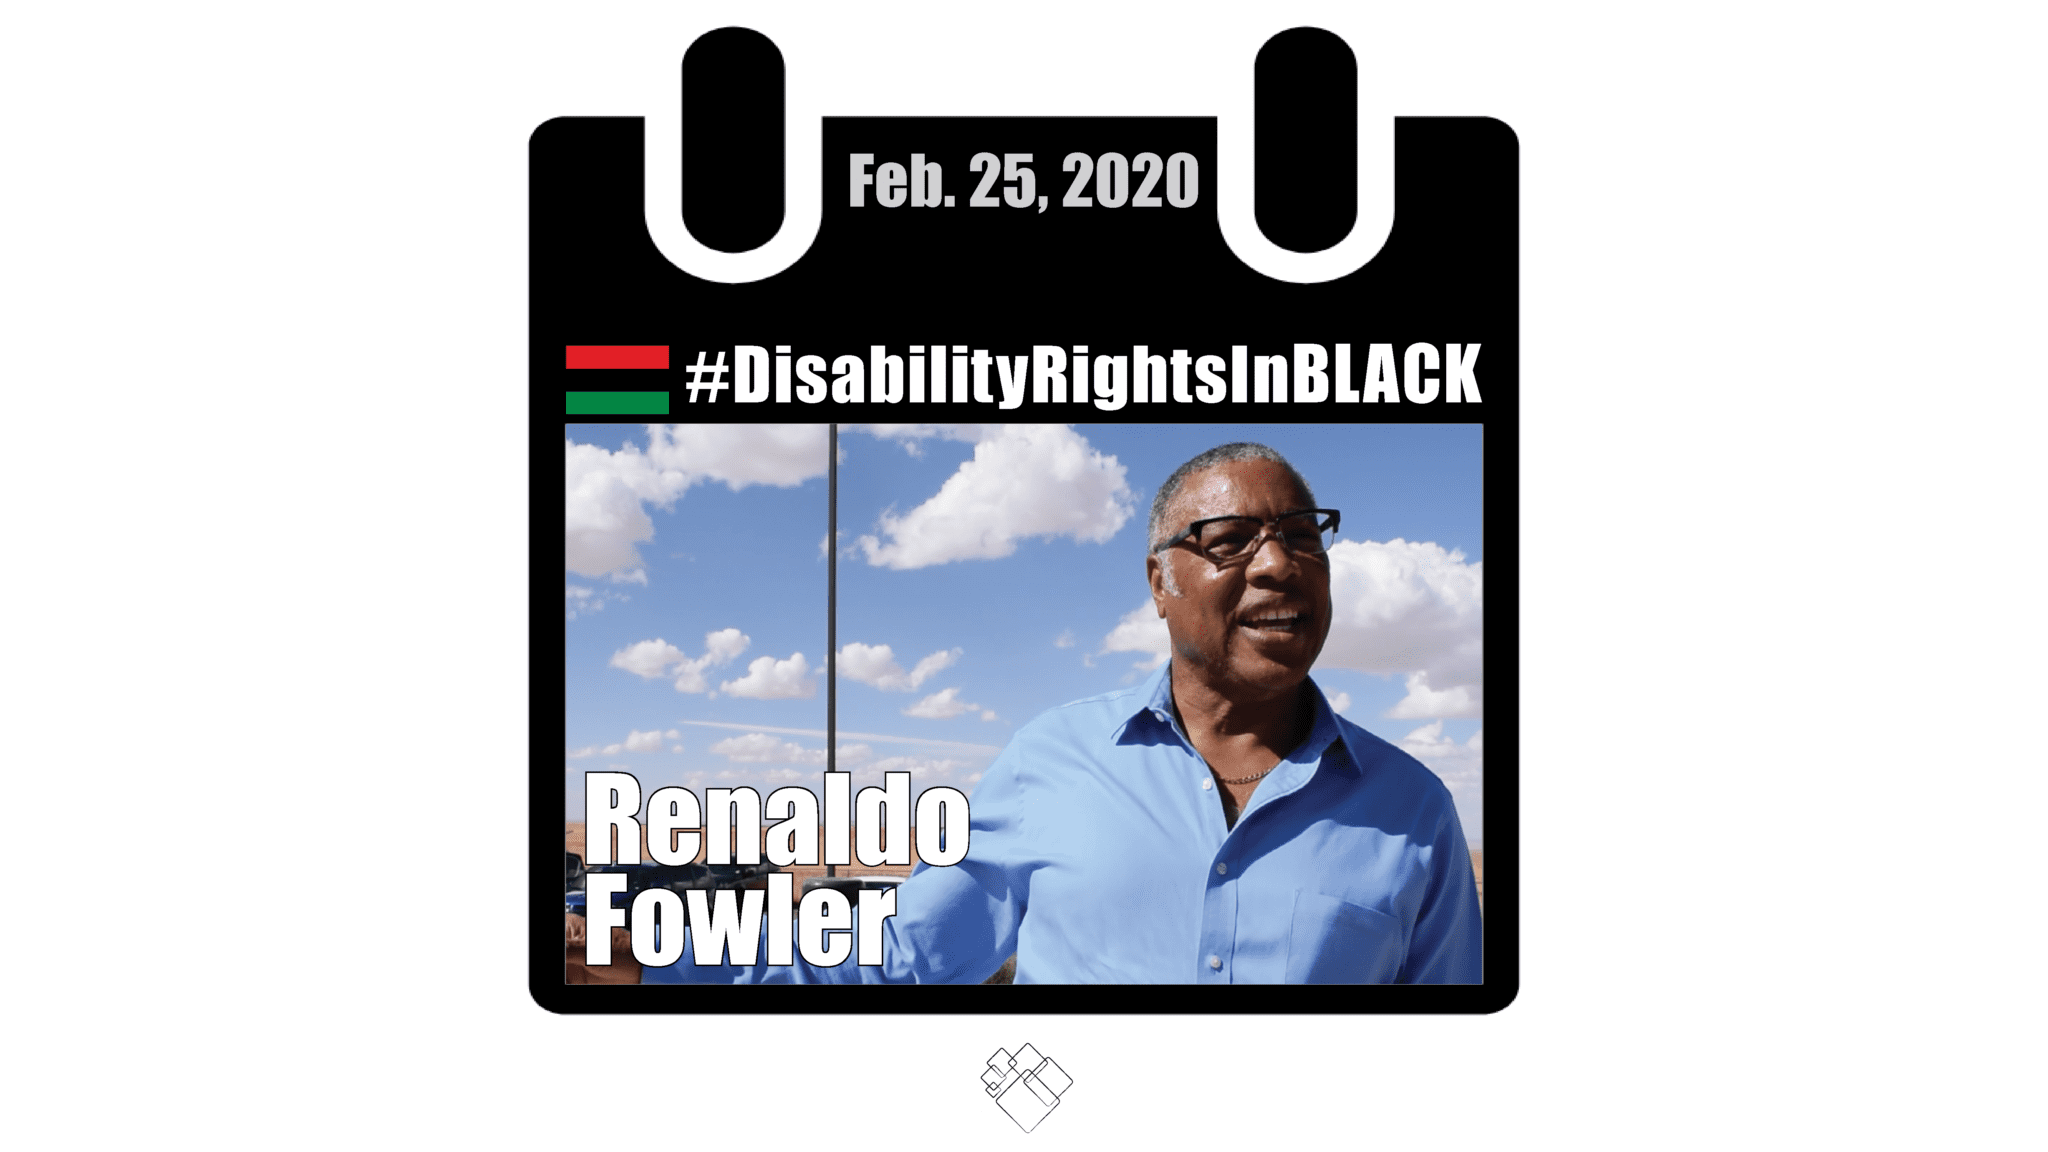 Renaldo wears a blue shirt and points off to the side. A big blue Arizona sky with clouds appears behind him. The image of him has the Disability Rights in Black calendar style frame graphic with the hashtag for the series at the top and the date, February 25, 2020.